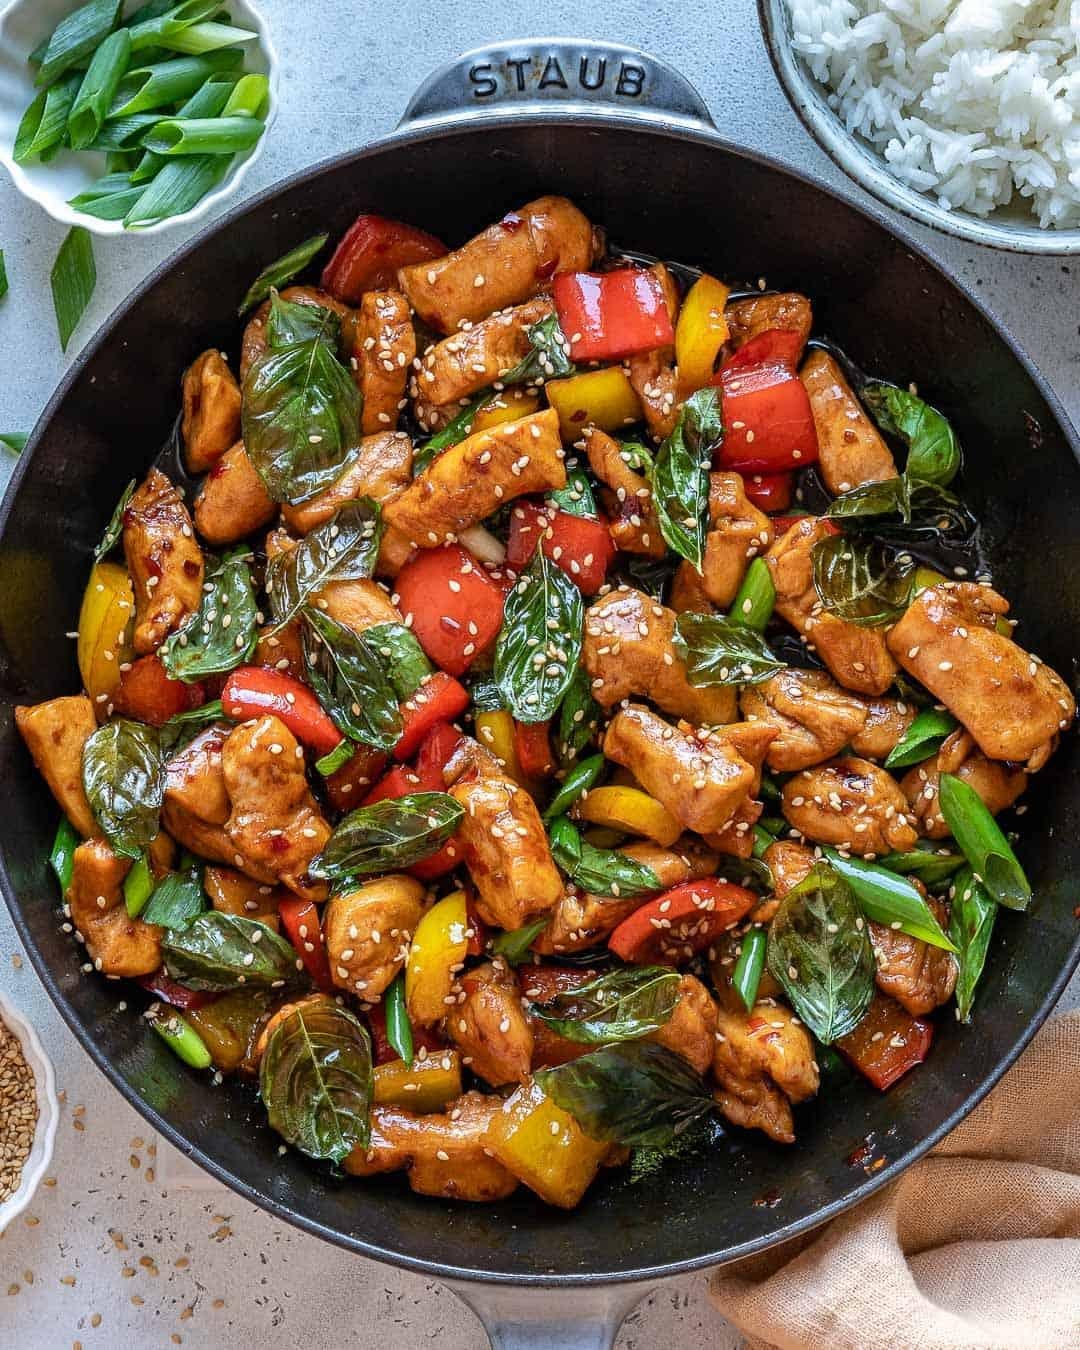 Aromatic and Delicious: How to Make Spicy Thai Basil Chicken at Home